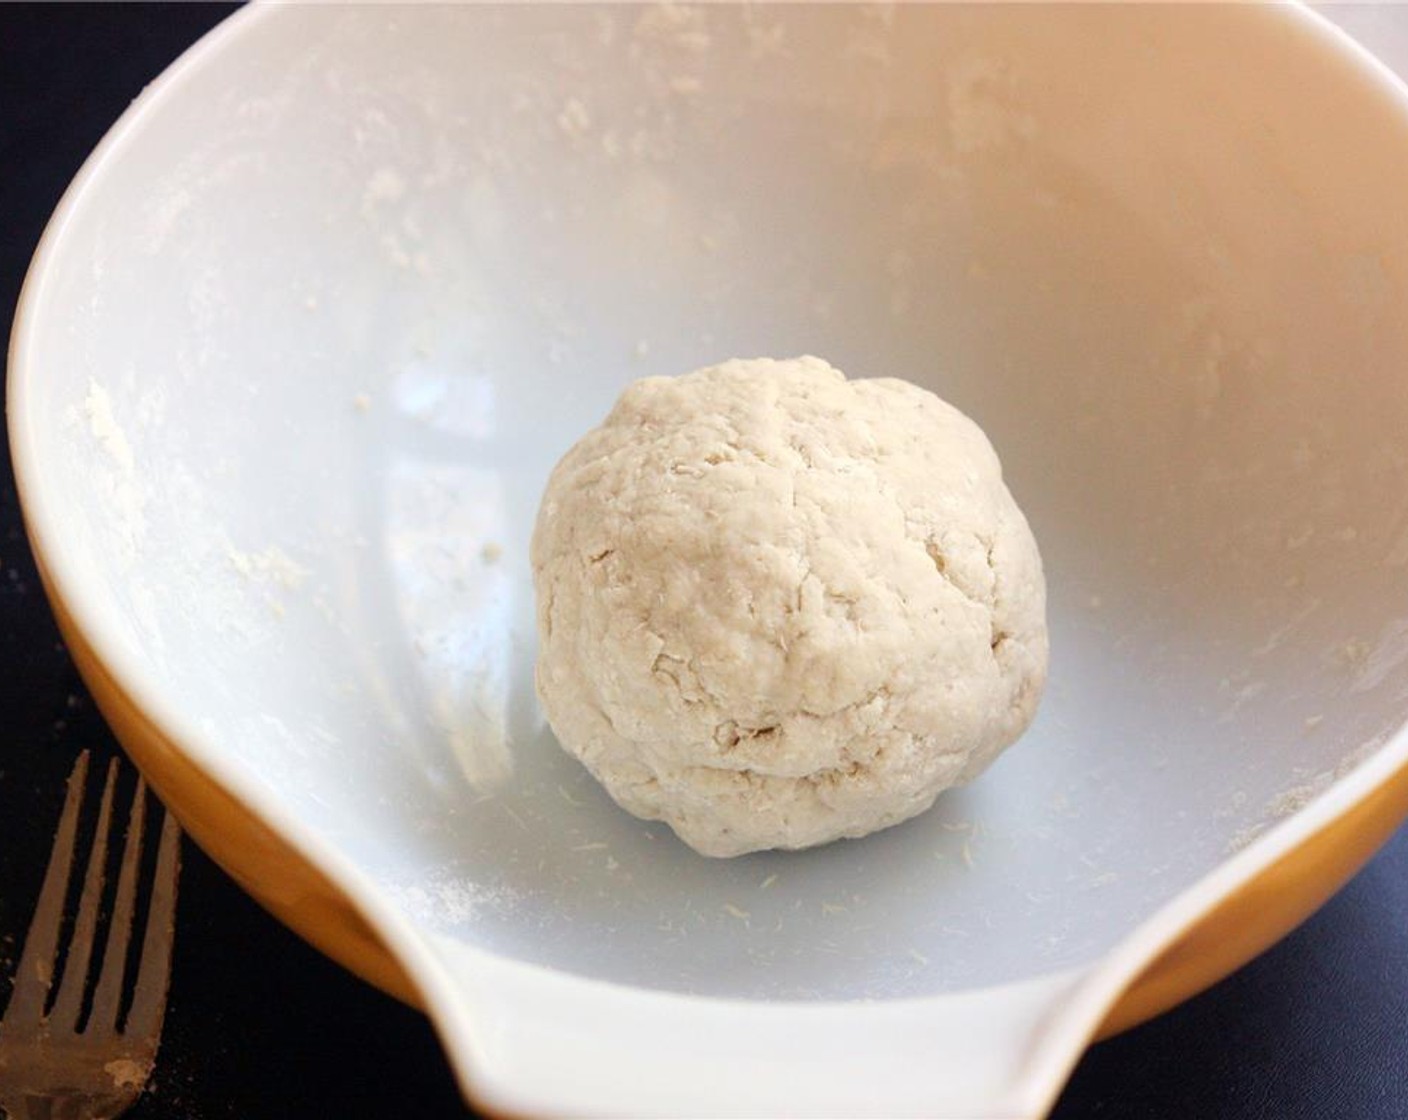 step 2 Add as much of the remaining Water (1/2 cup) as you need to gather all dry ingredients into the dough. Dough should be very stiff and not sticky. Form dough into a ball and leave it in the bowl.